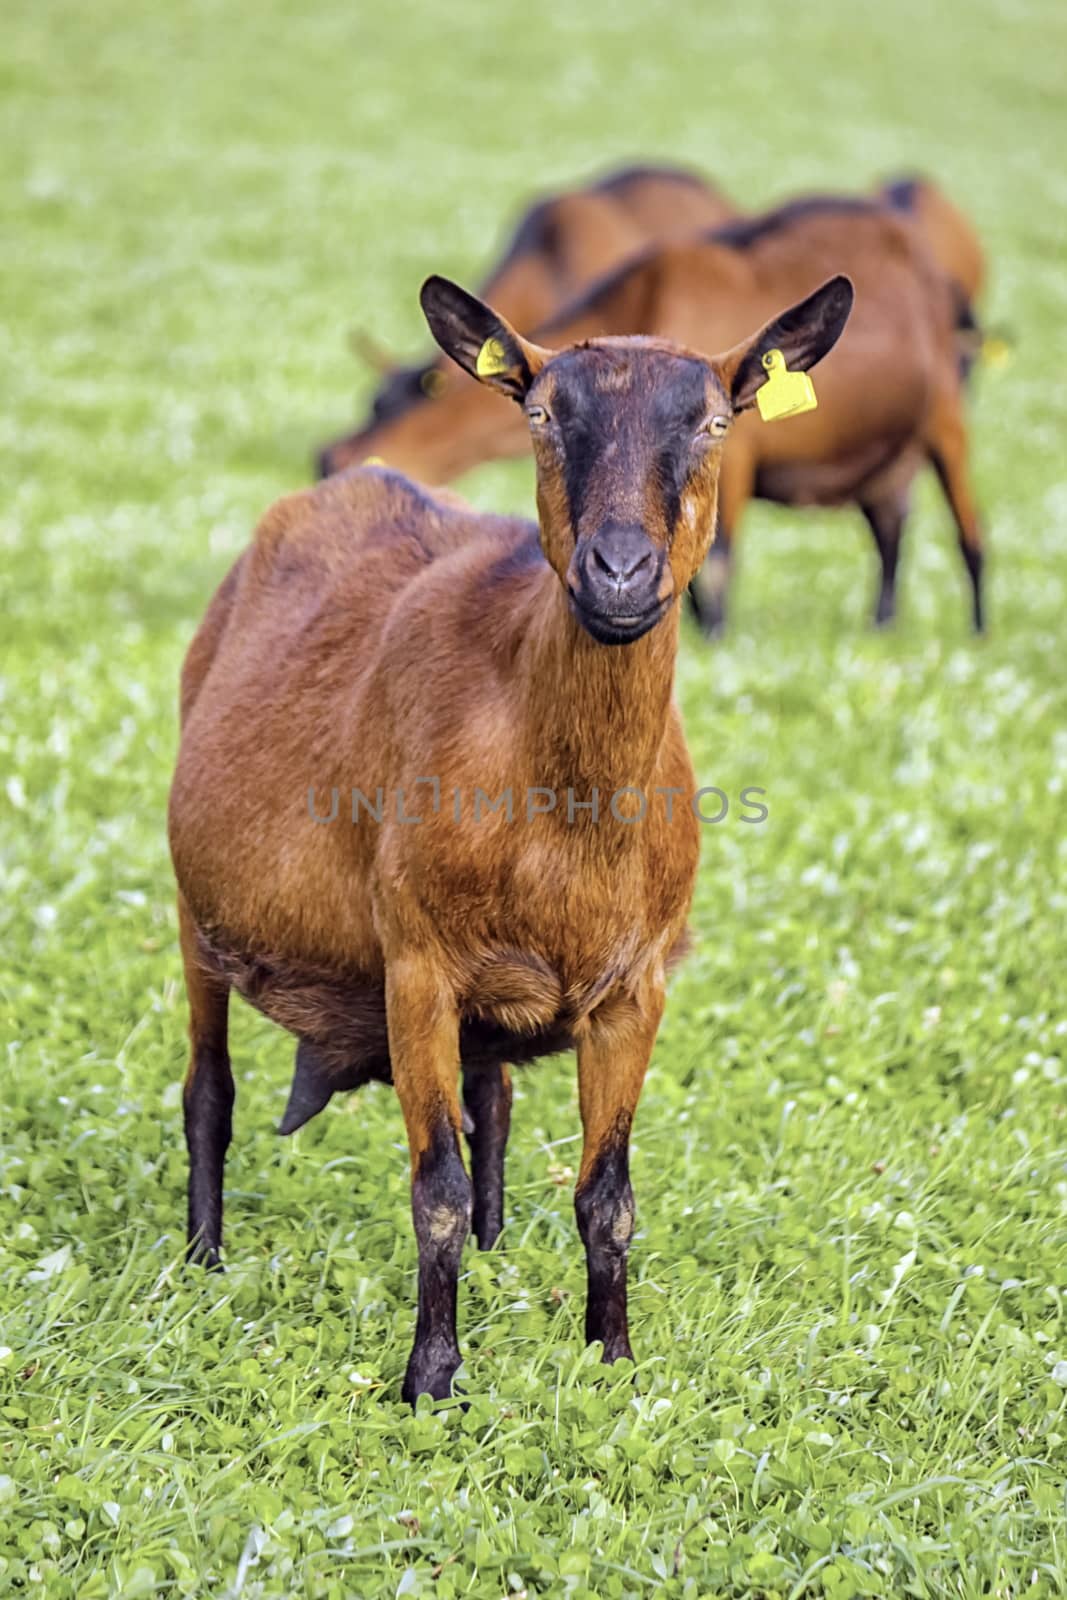 Brown goat by Elenaphotos21